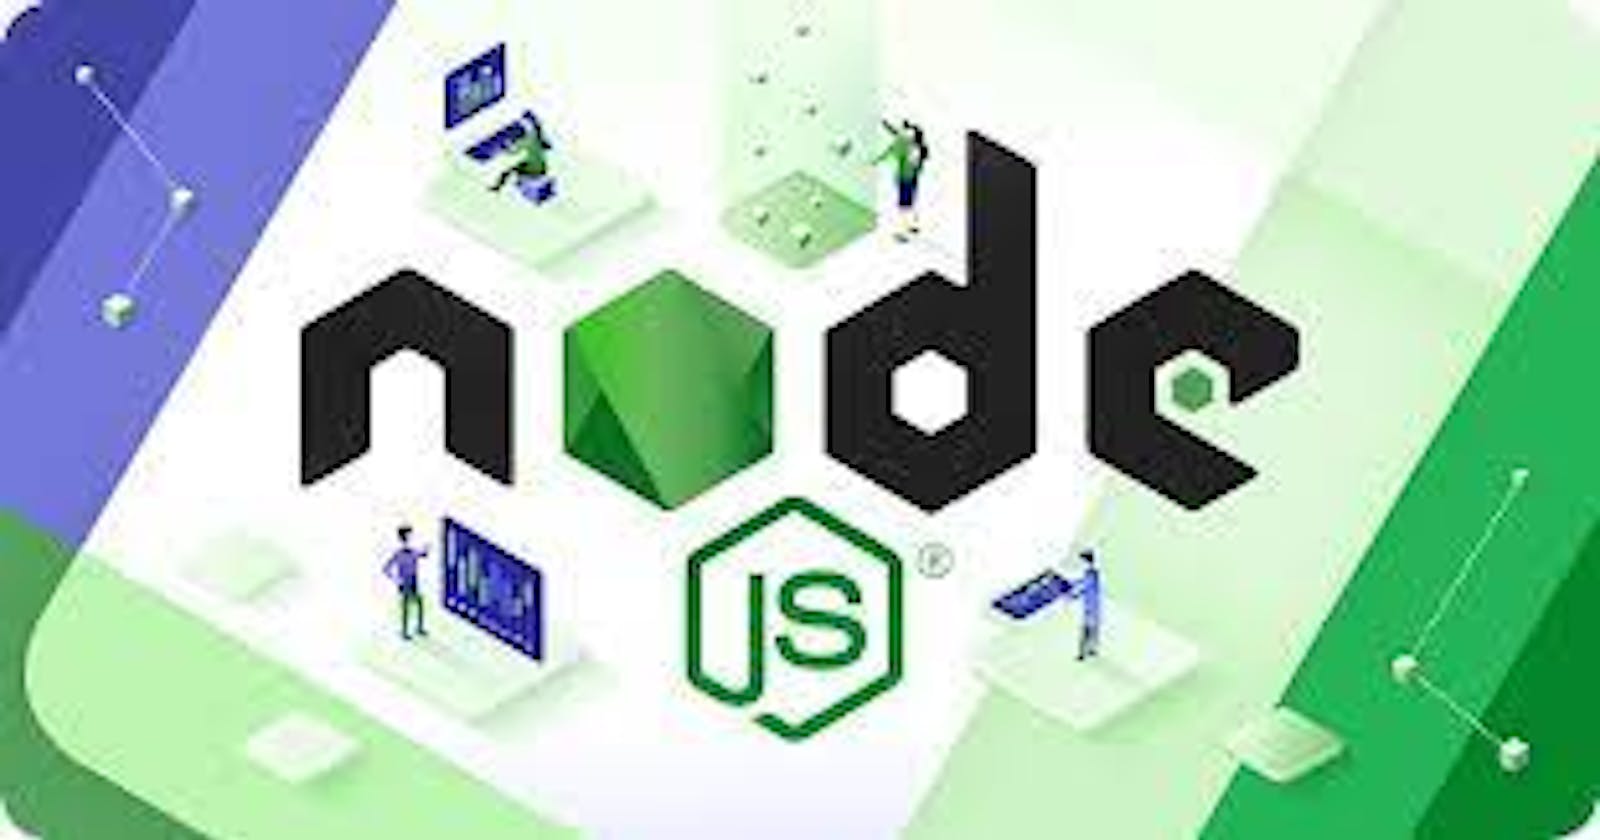 Node.js Development: All You Need to Know